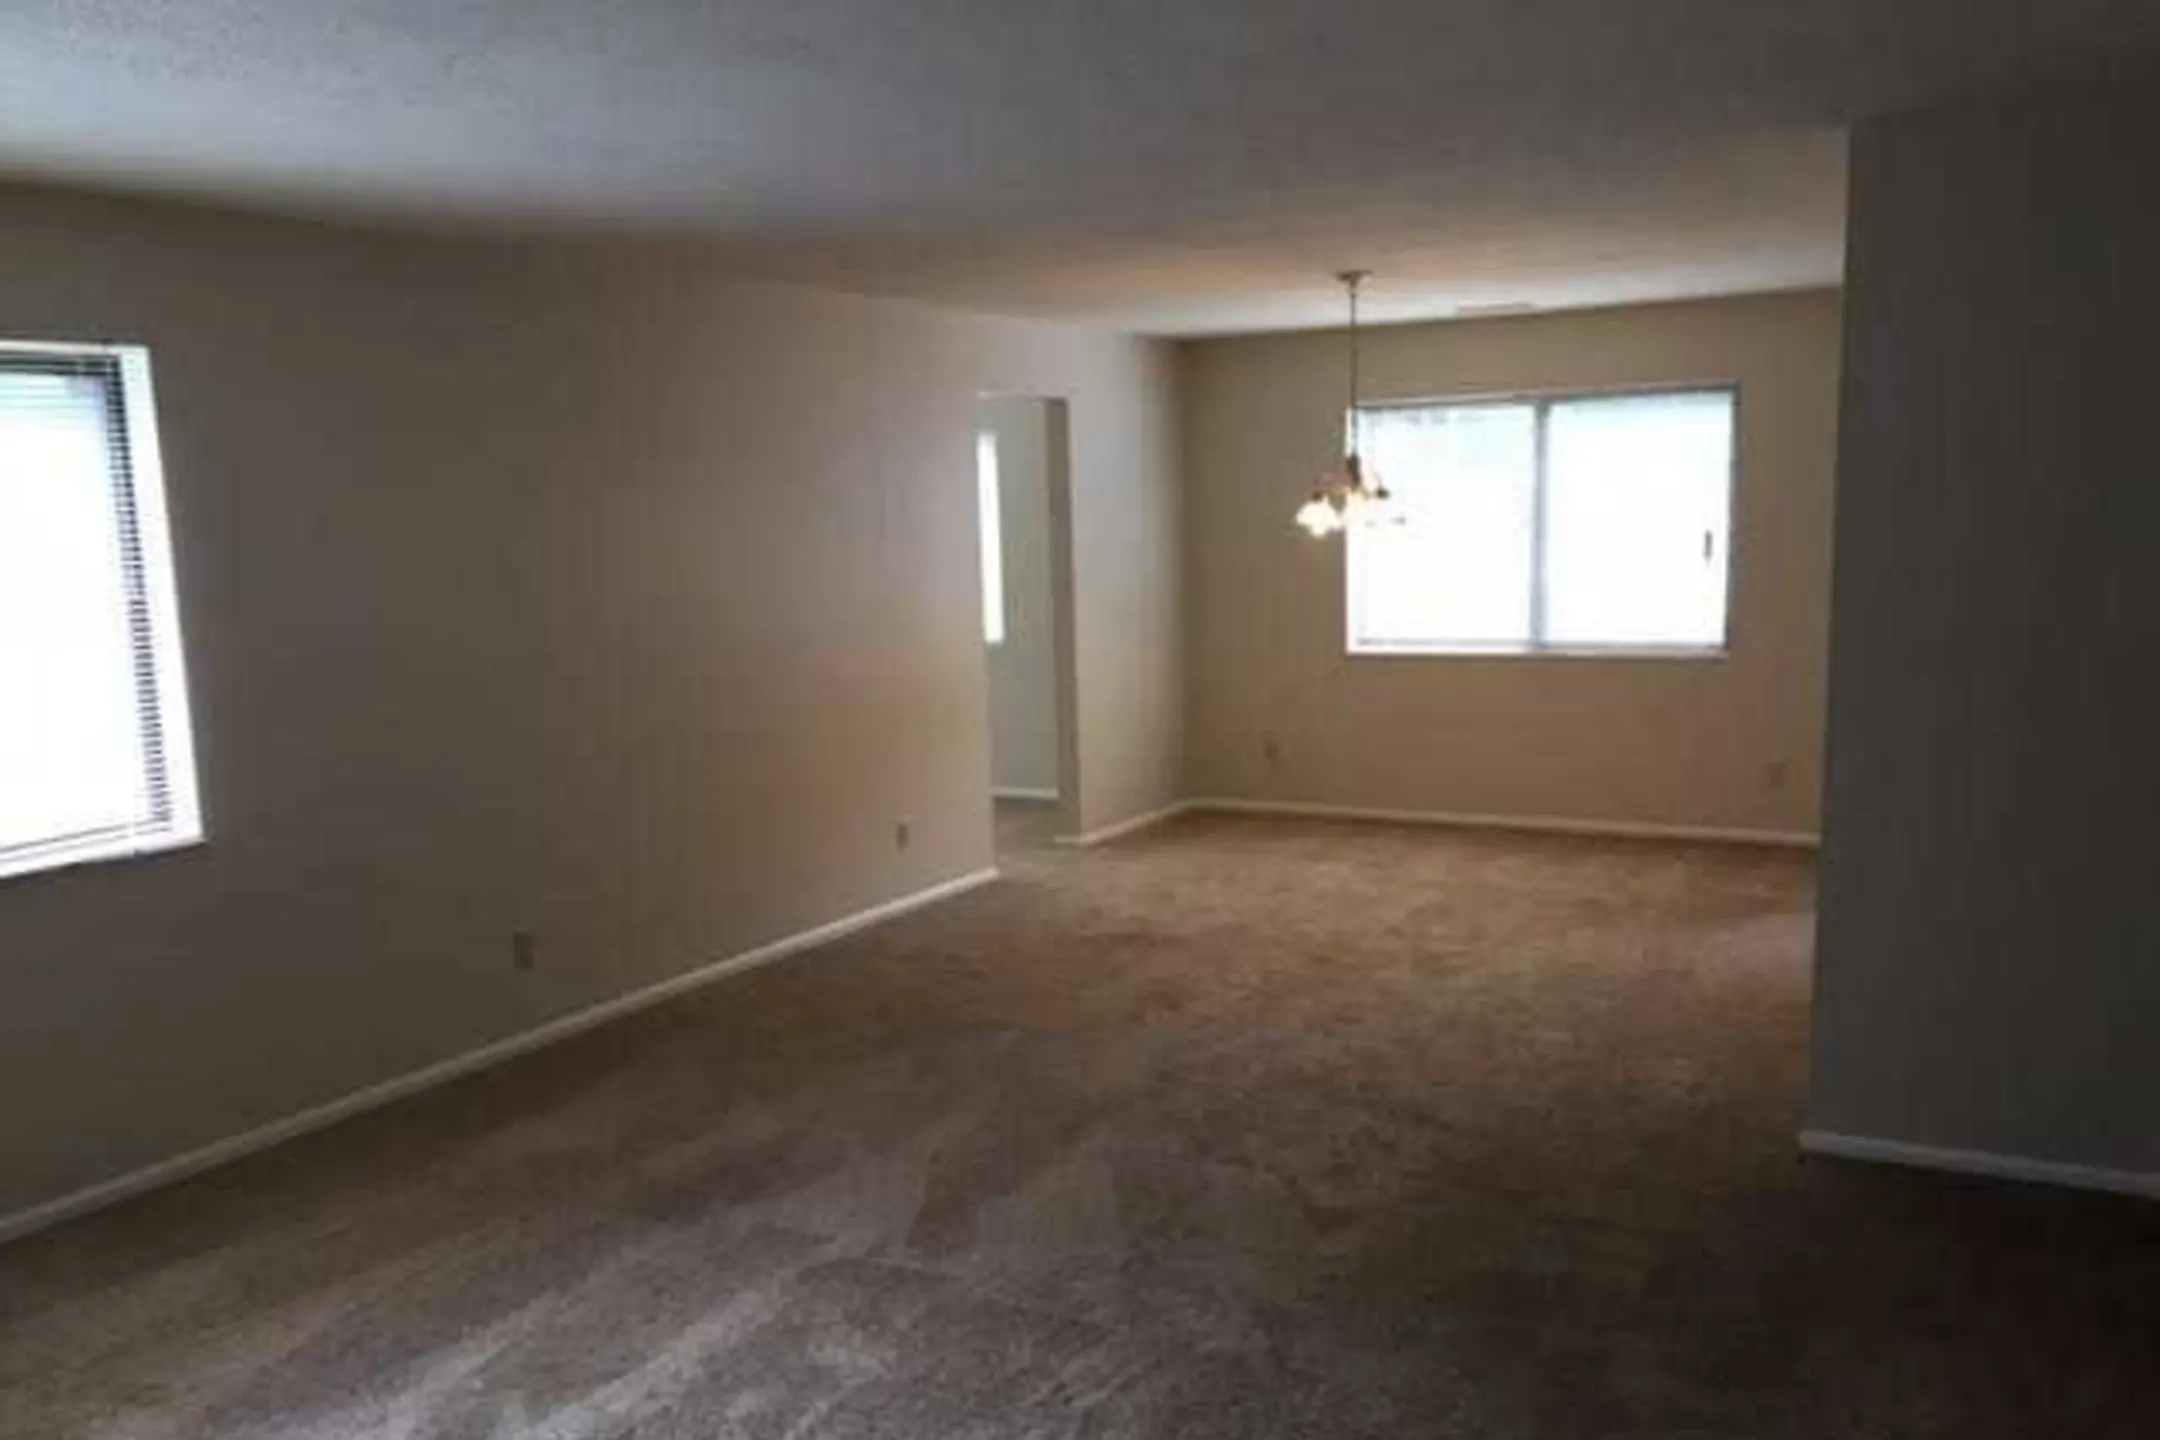 Living Room - Monticello Apartments & Townhomes - Youngstown, OH